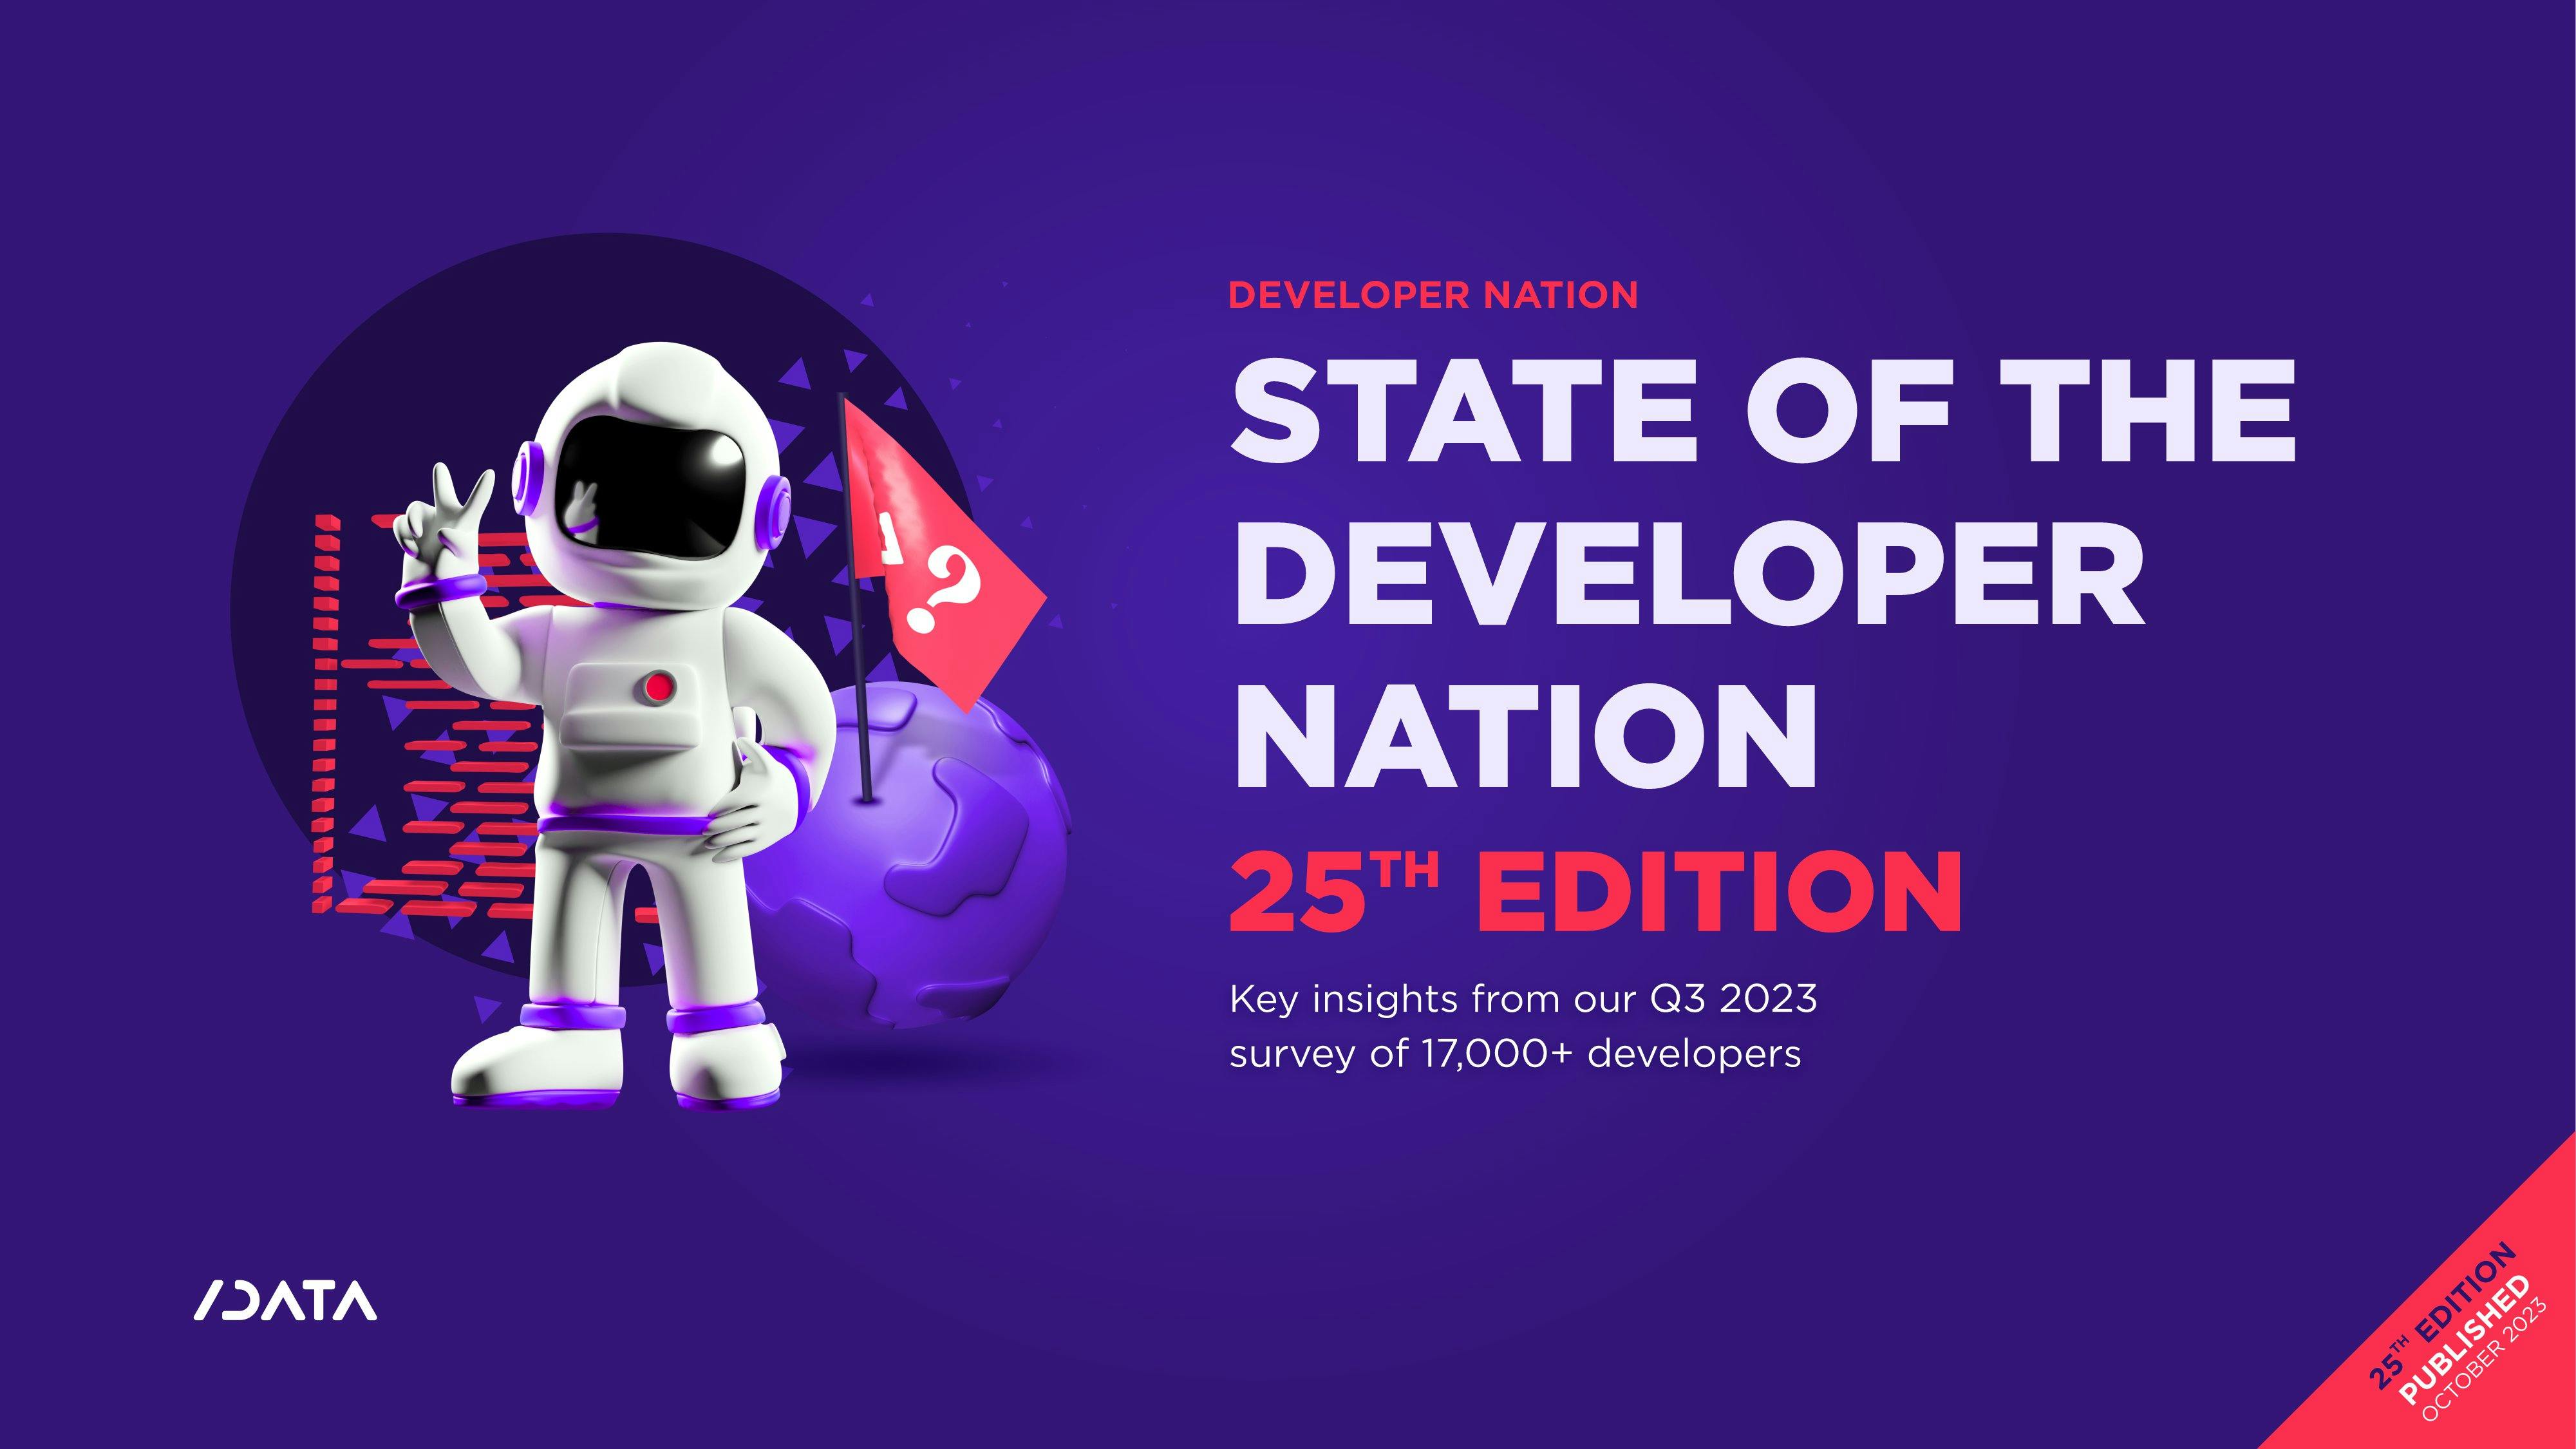 State of the Developer Nation 25th Edition - Q3 2023